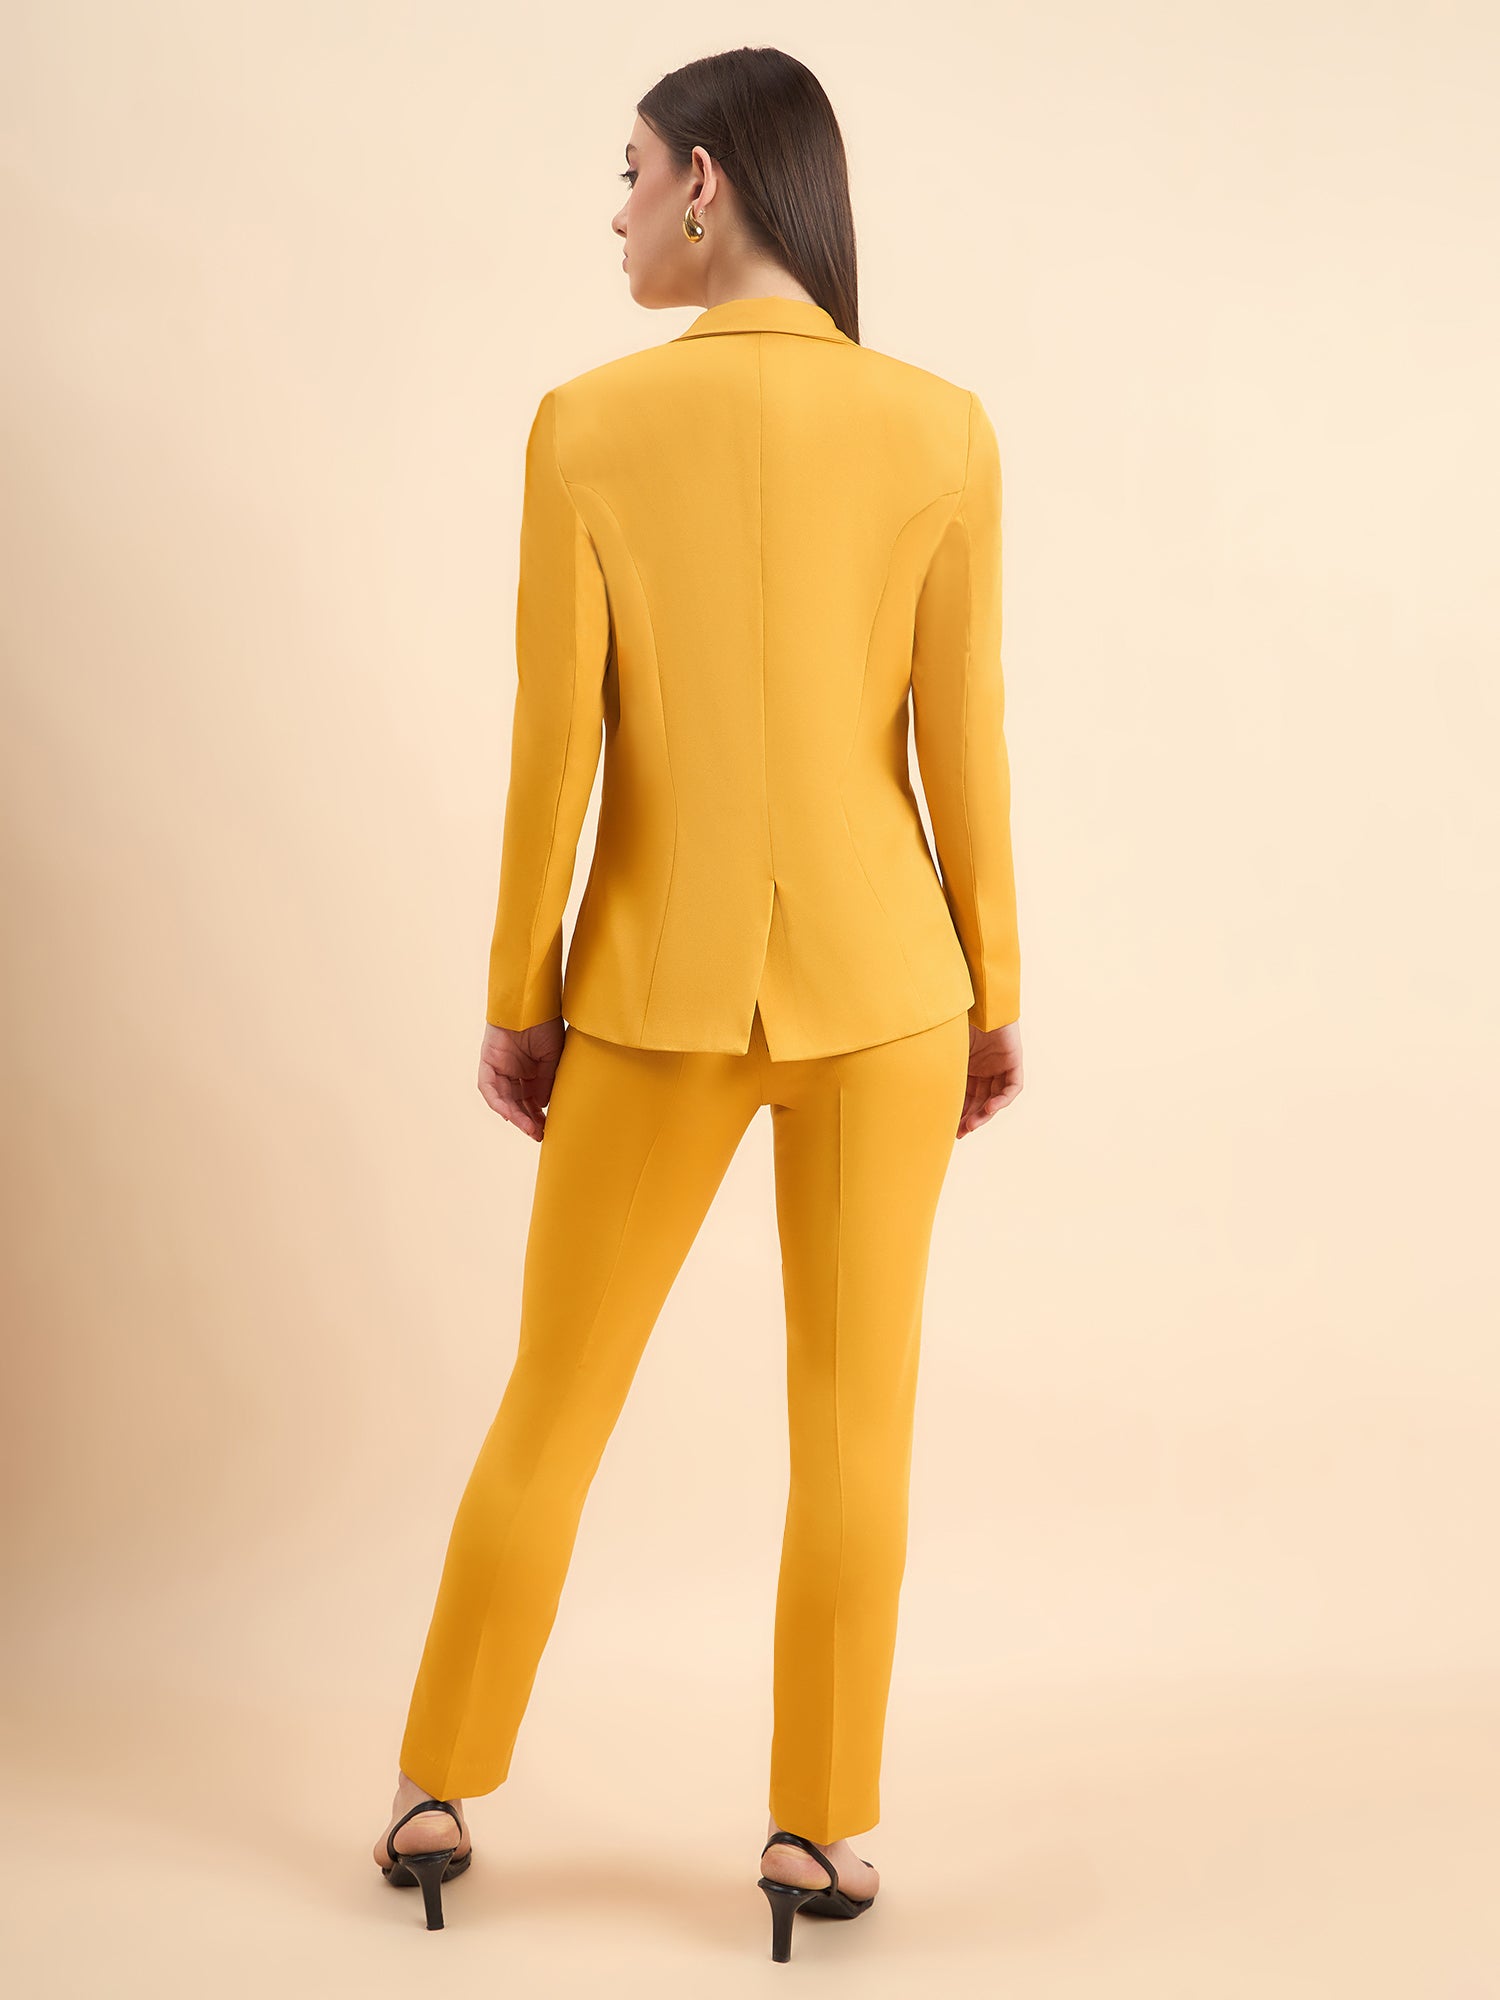 Women's Formal Pant Suit For Work- Mustard Yellow